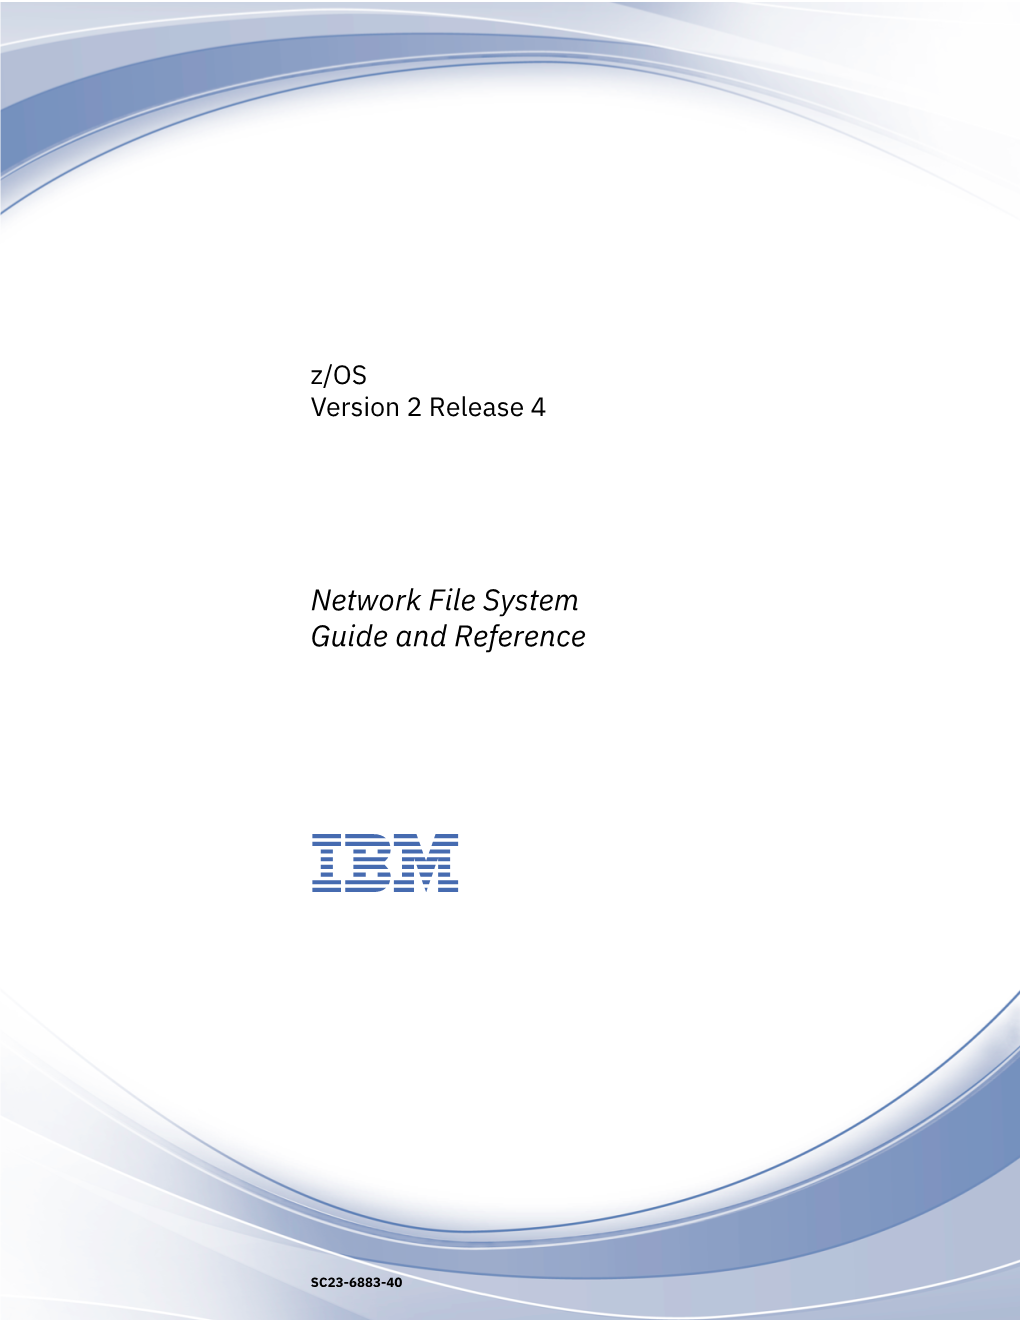 Z/OS: Z/OS Network File System Guide and Reference How to Send Your Comments to IBM